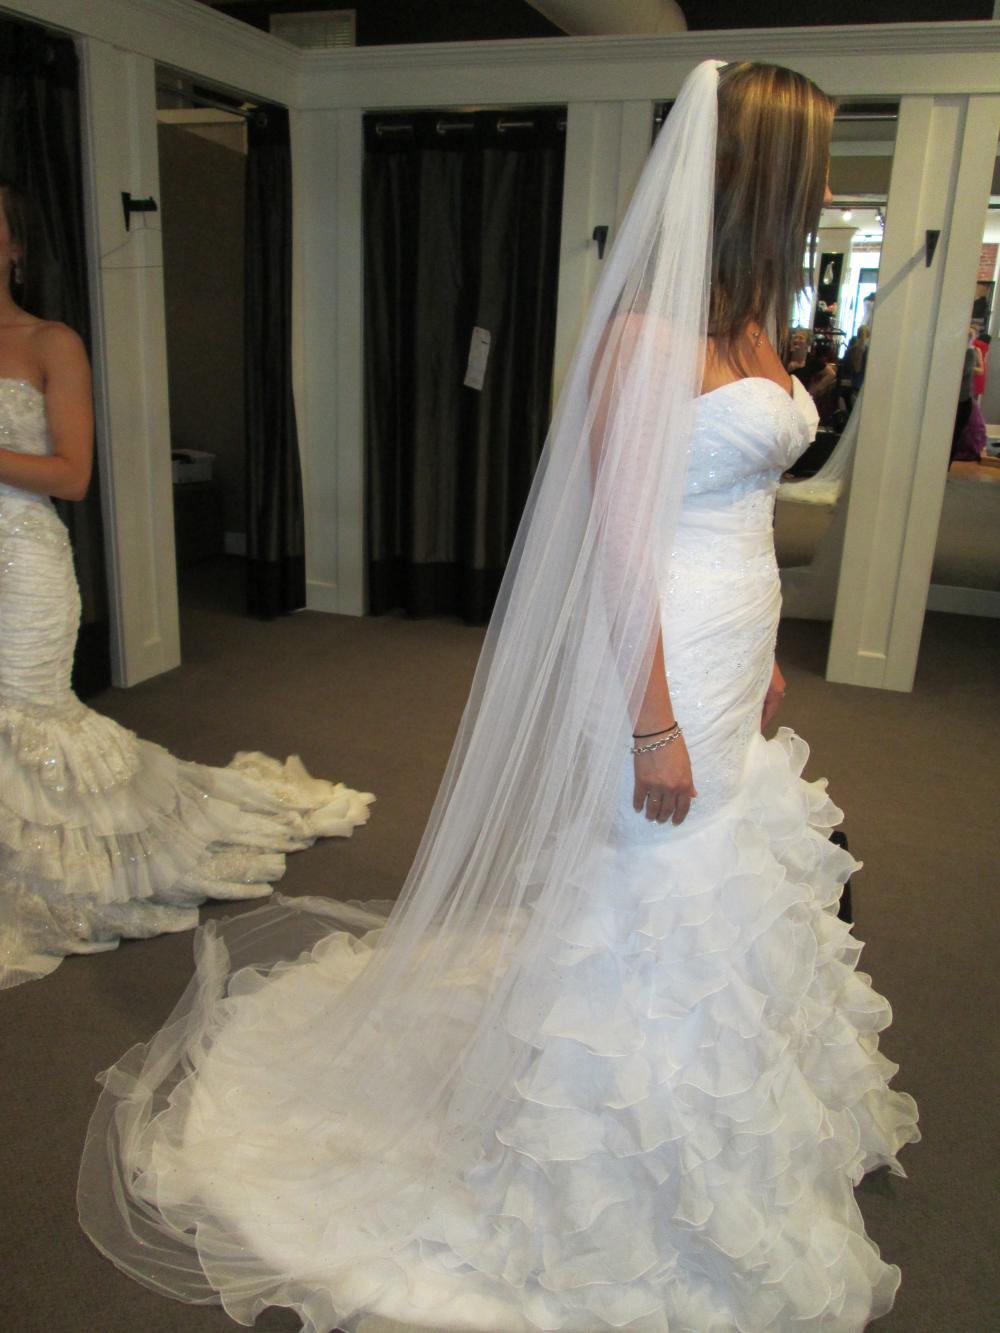 To Veil or not to Veil?